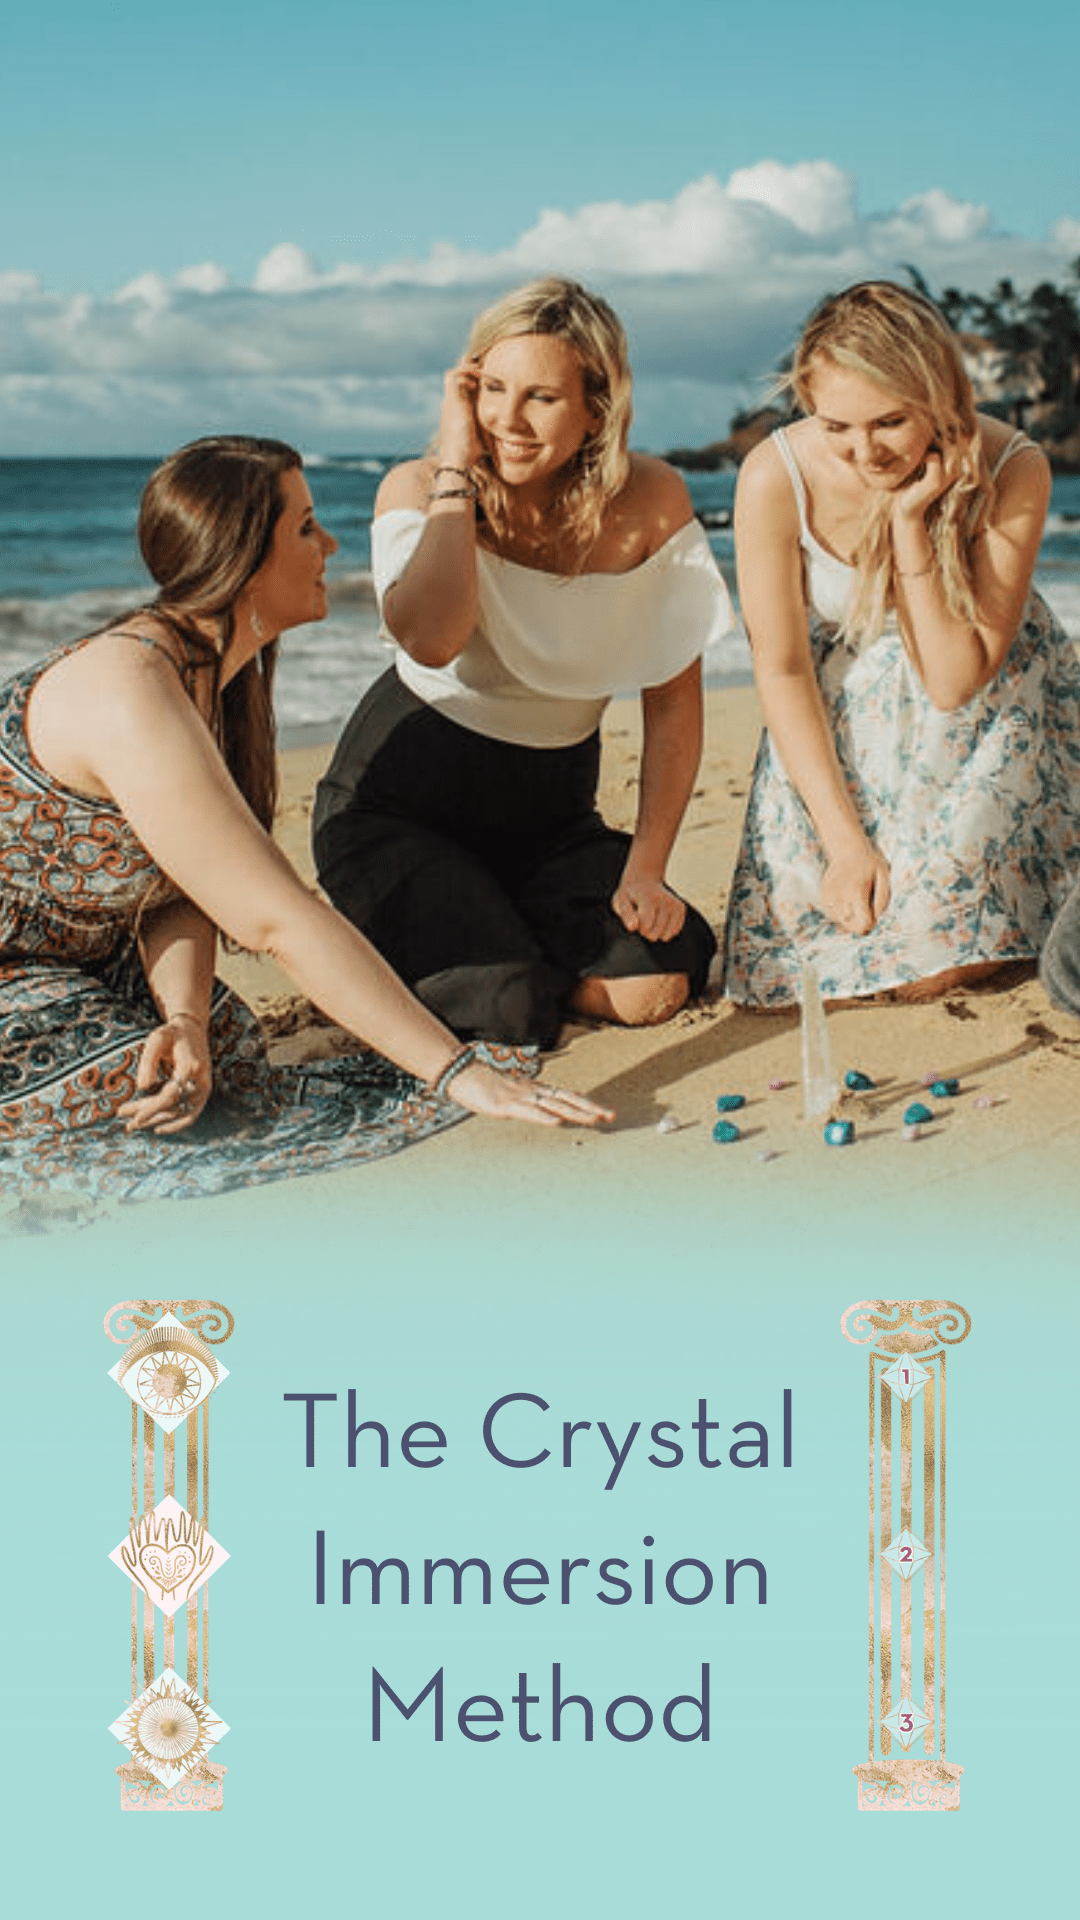 The Crystal Immersion Method